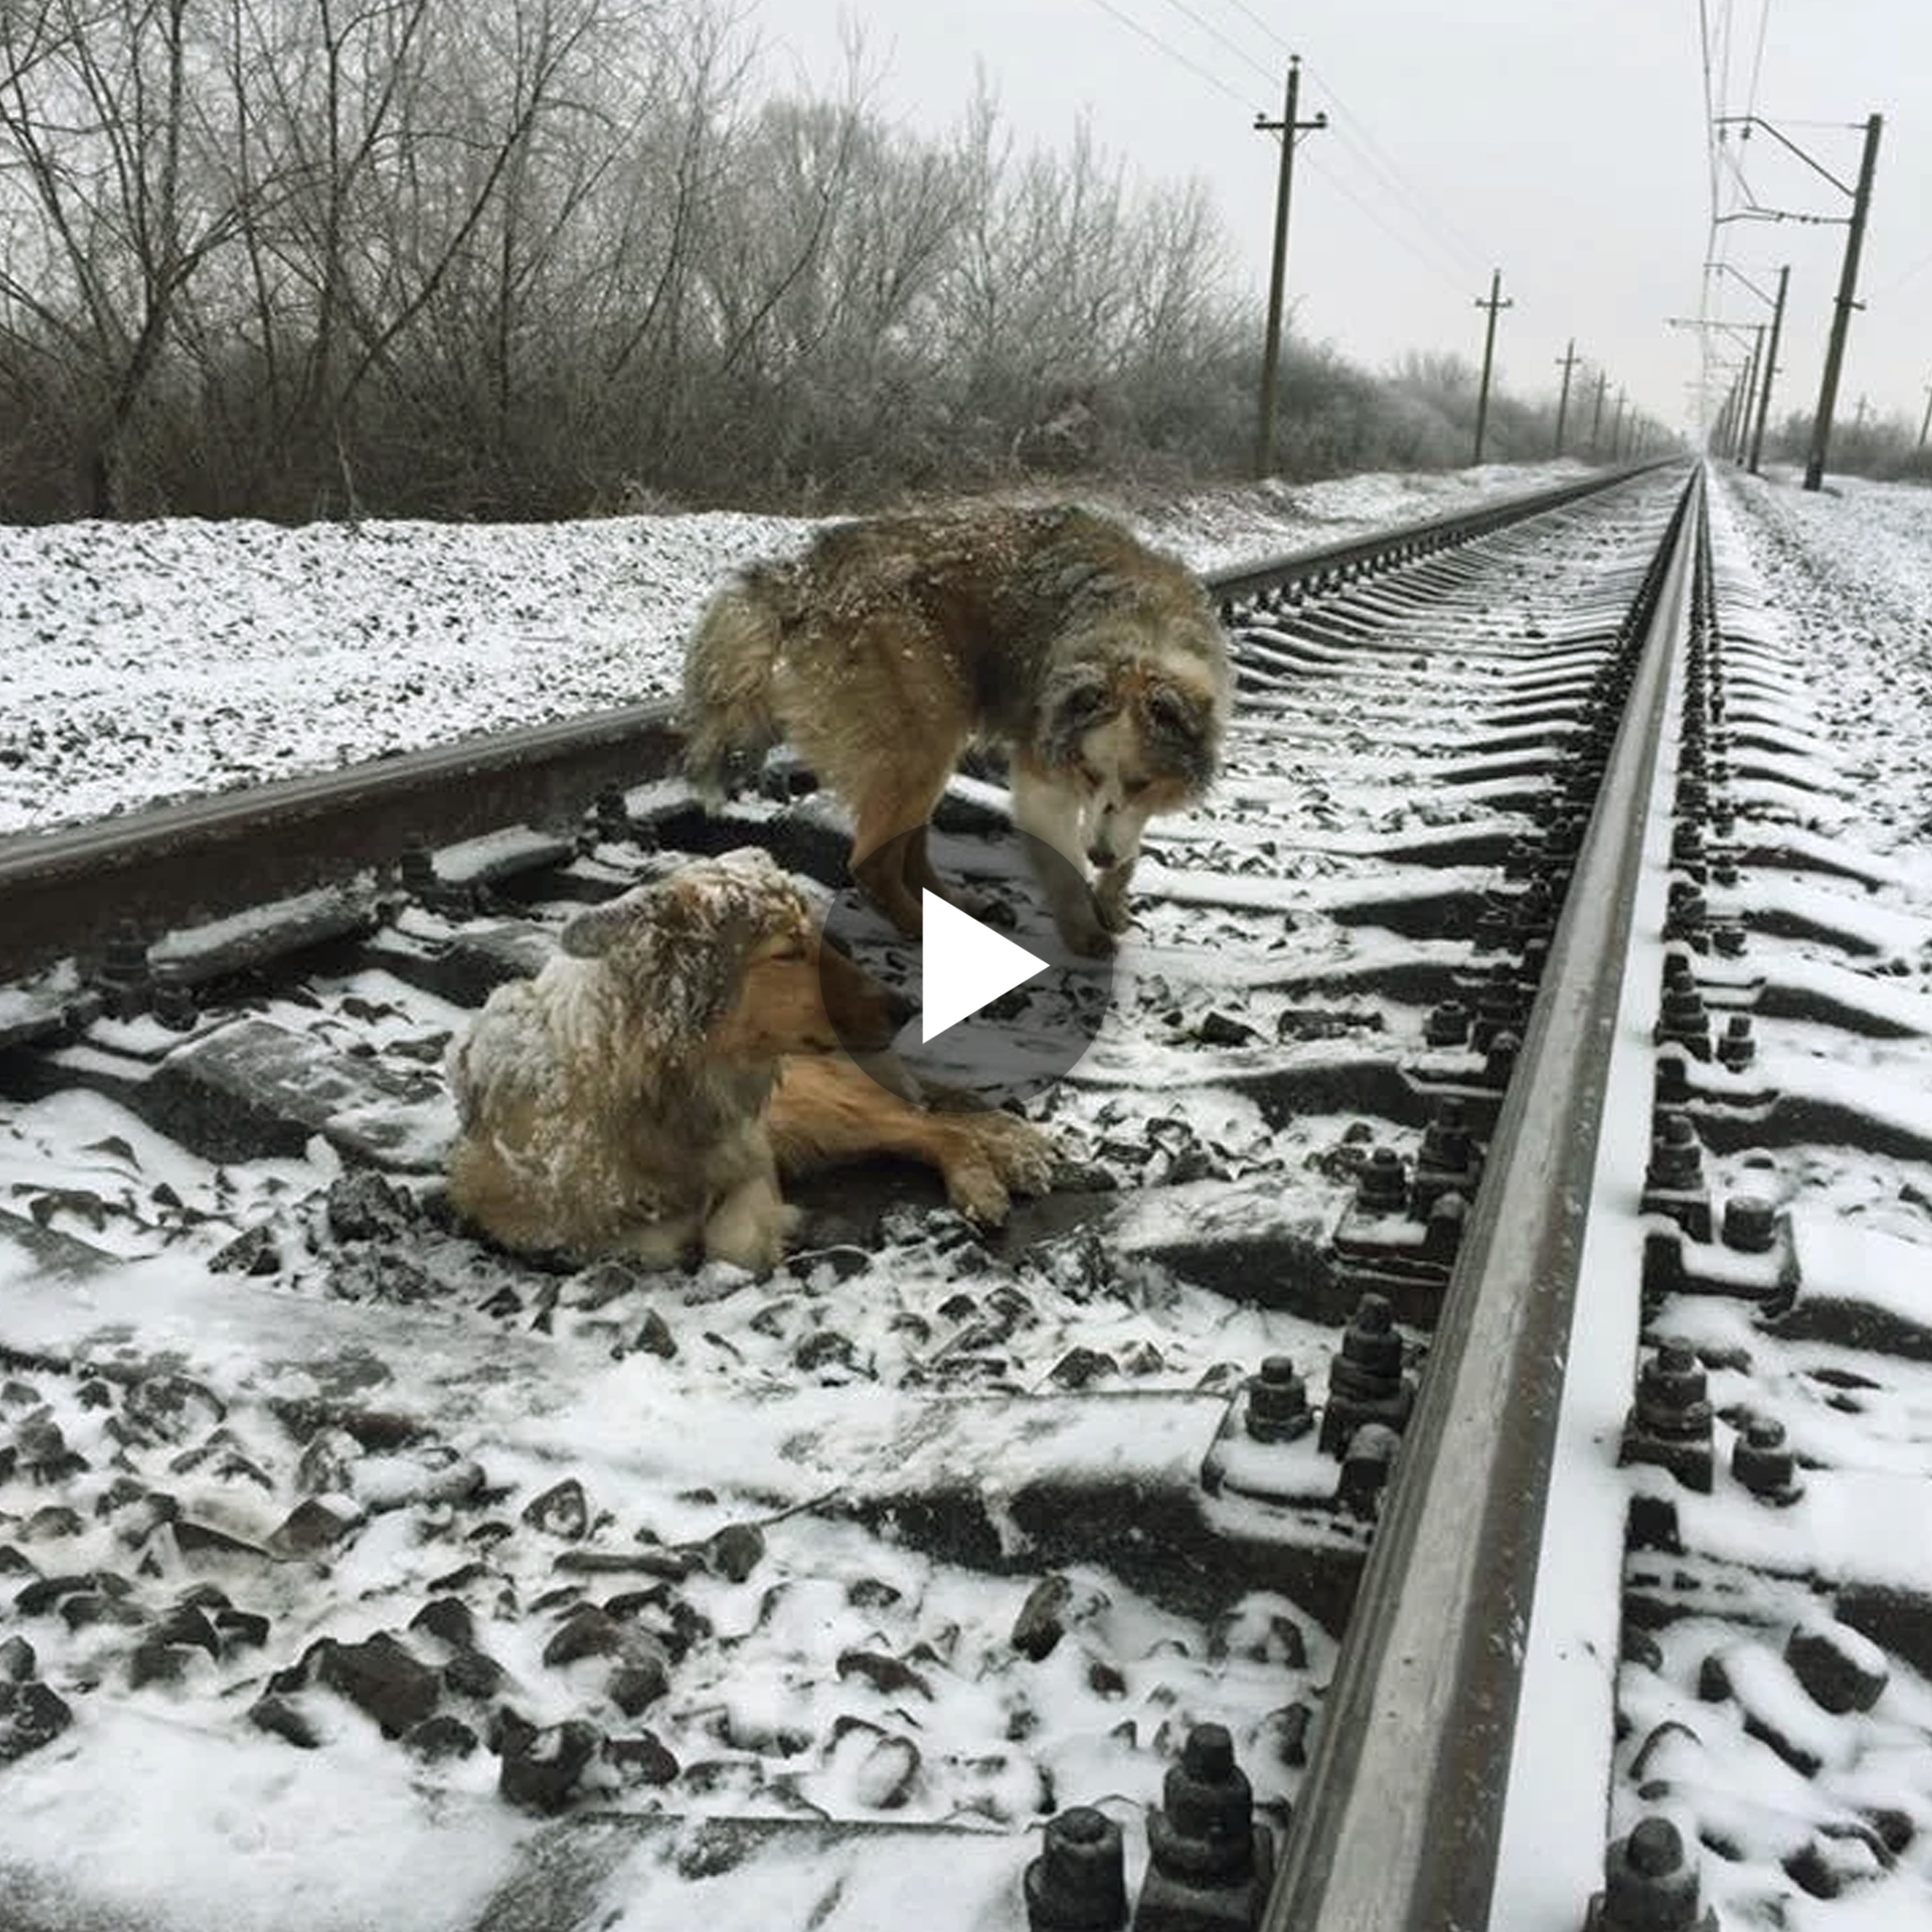 A truly loyal dog spent two days protecting his injured friend on frozen train tracks, ignoring the trains that passed by.